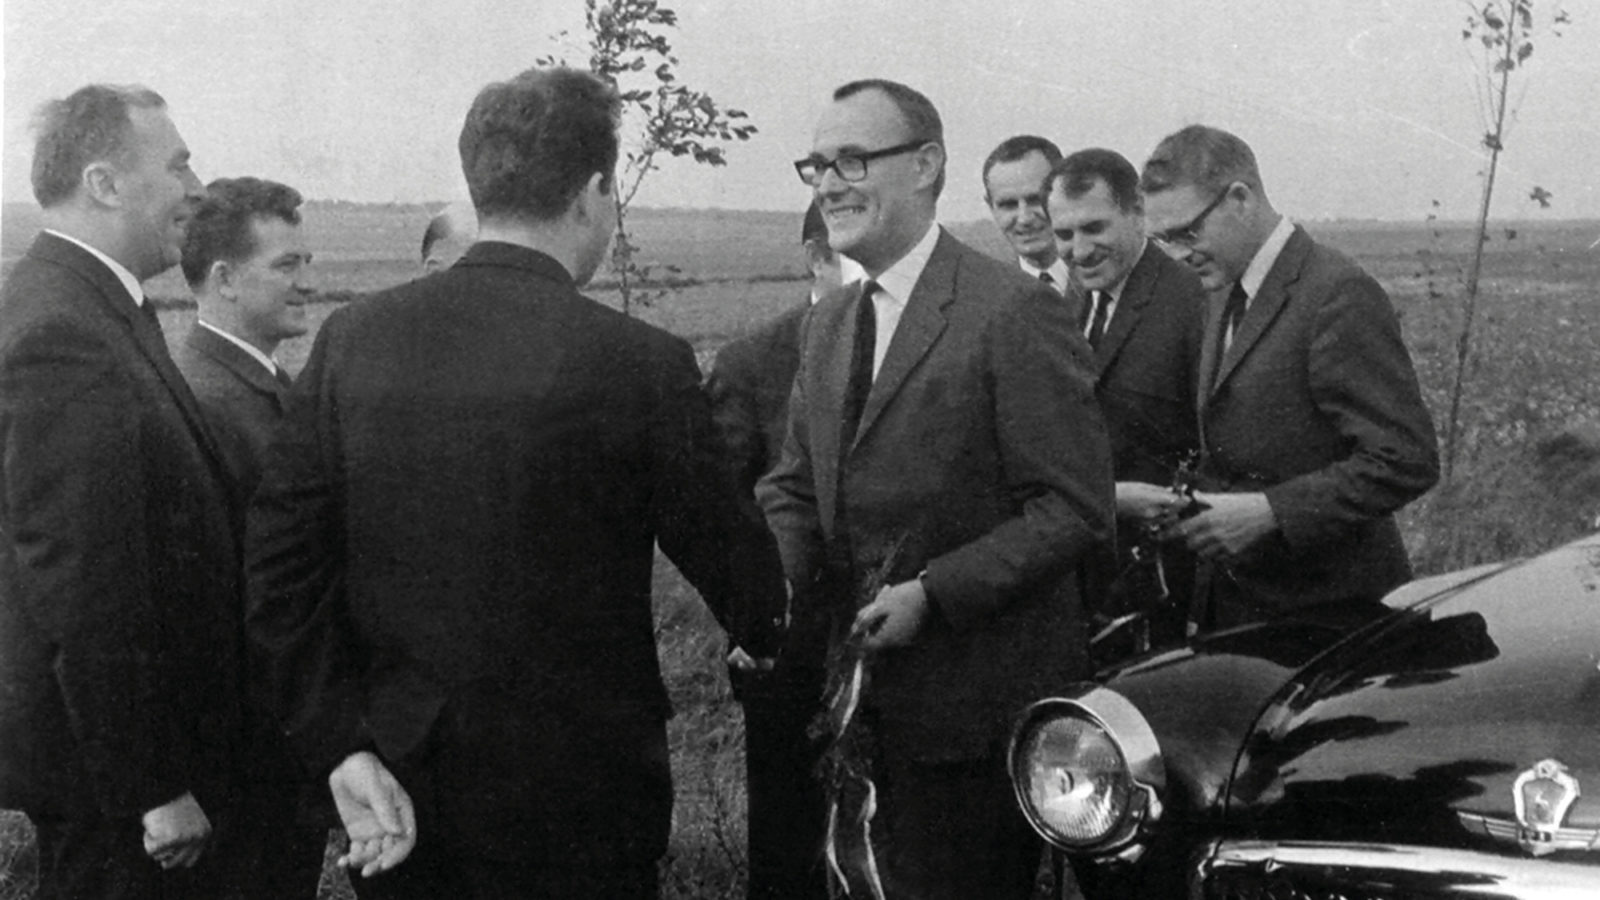 Group of smiling men in dark suits standing outdoors next to 1960s car, one of them shaking hands with Ingvar Kamprad.